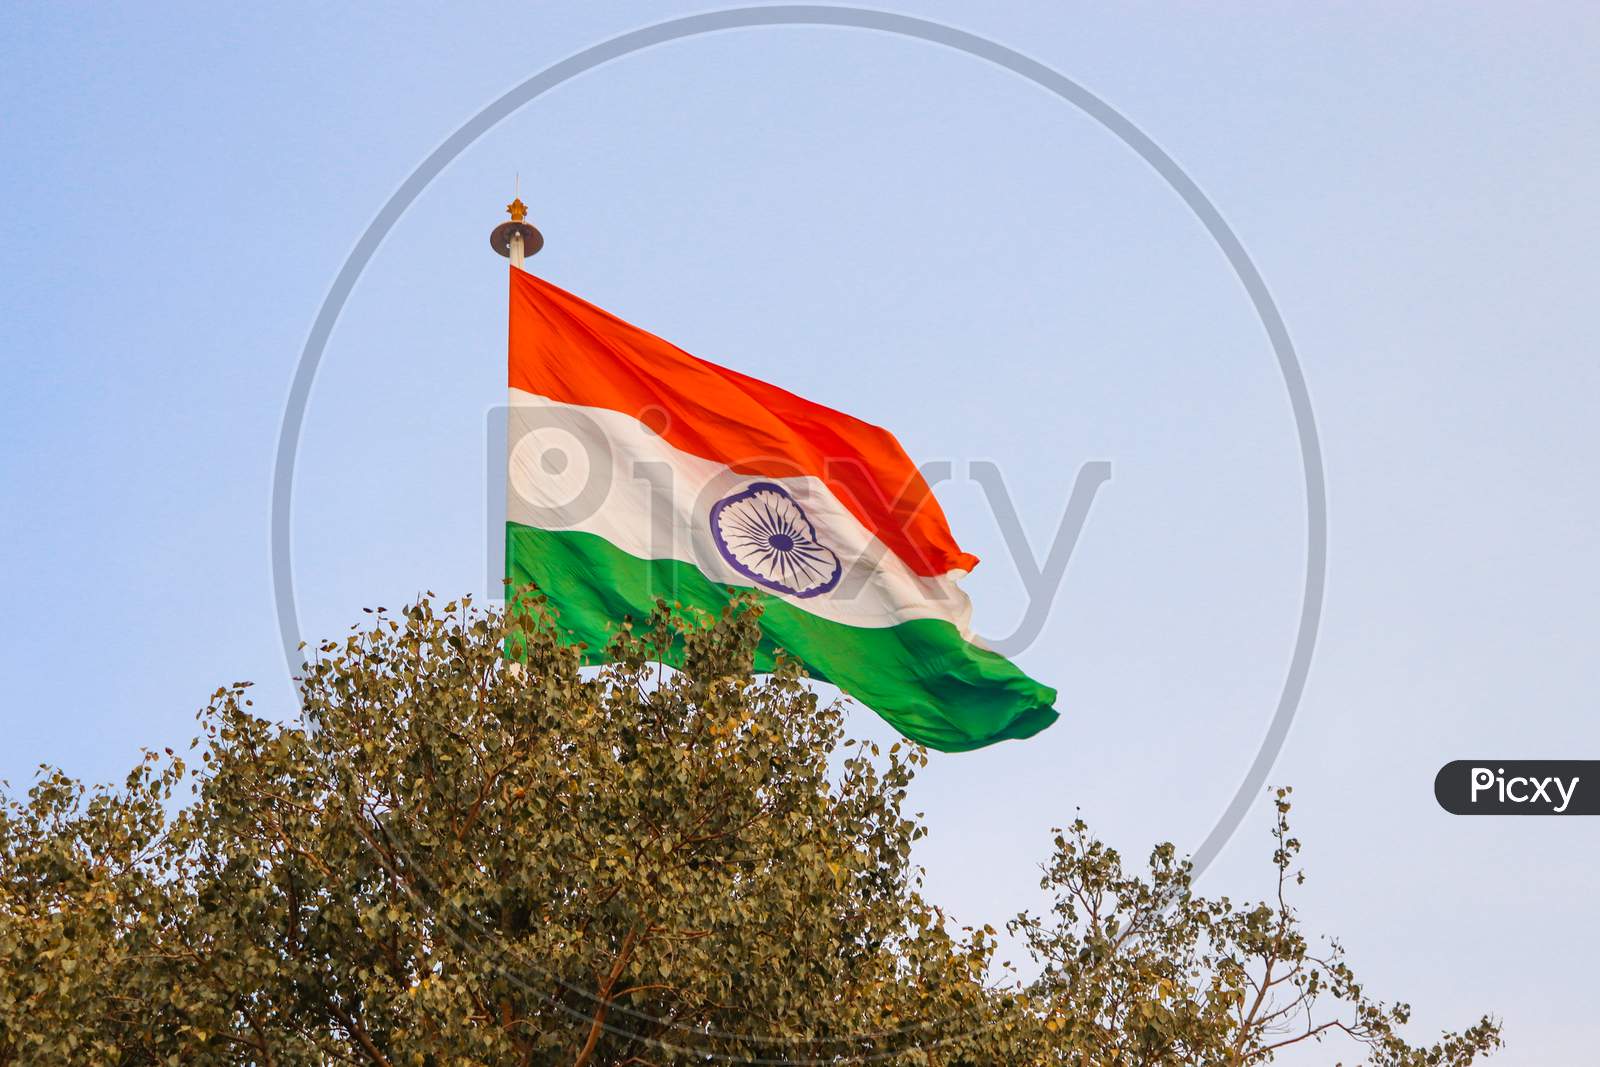 India Flag With Clear Blue Sky In The Background And Tree In Foreground